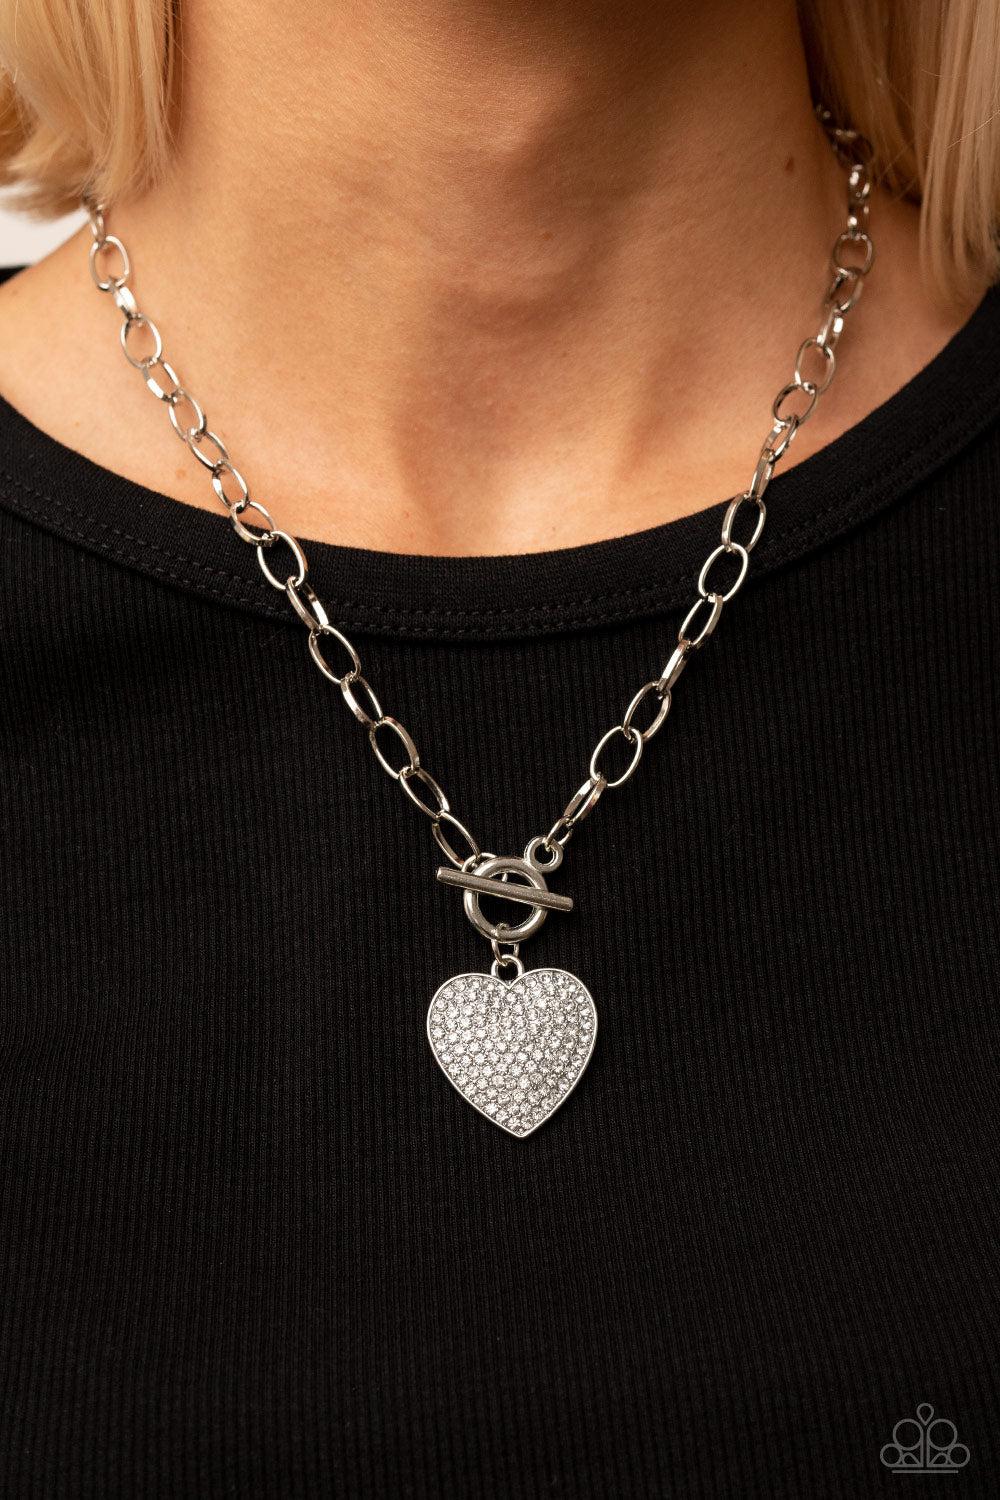 If You LUST White Rhinestone Heart Necklace - Paparazzi Accessories- on model - CarasShop.com - $5 Jewelry by Cara Jewels